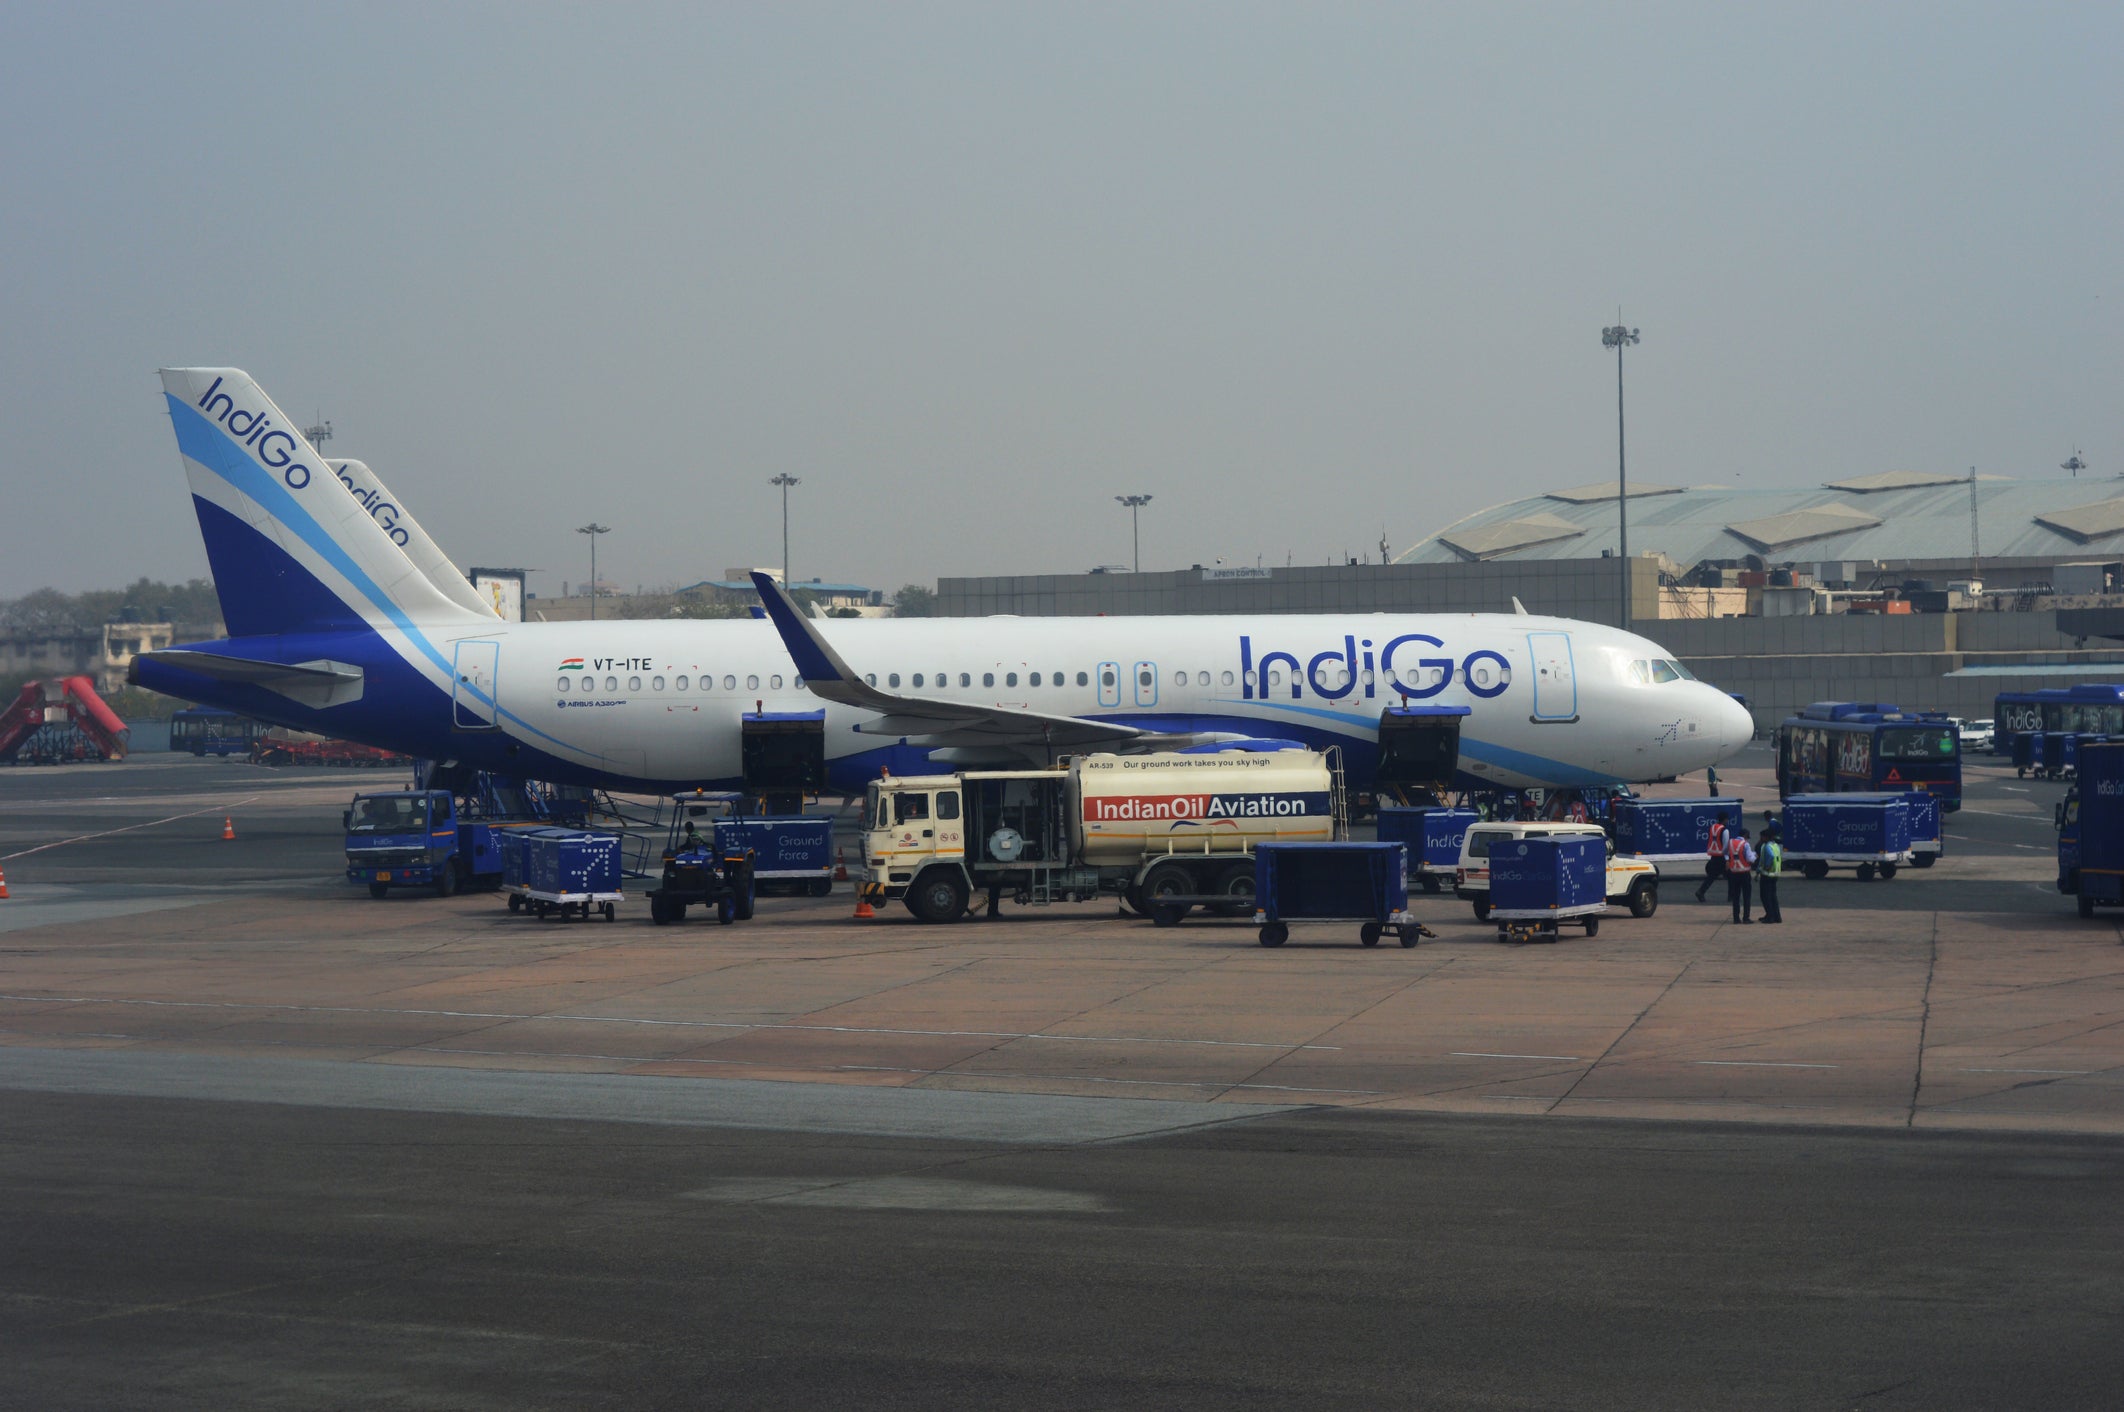 The incident occurred after an IndiGo flight